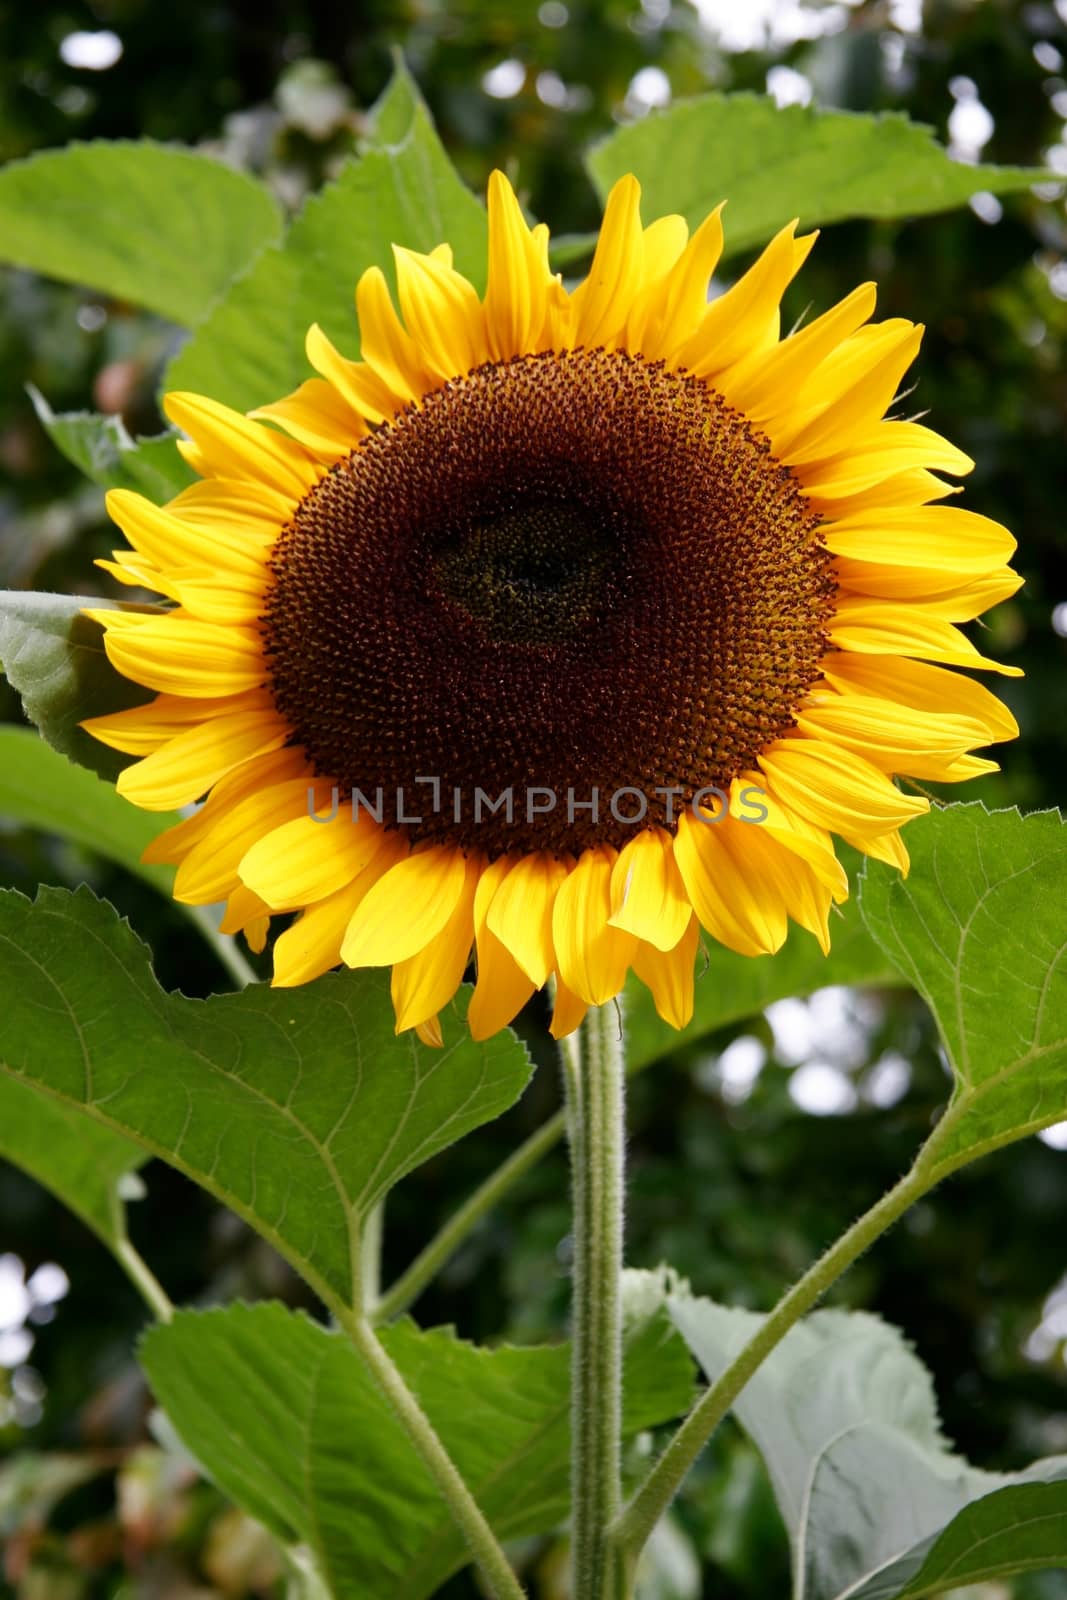 Magnificent Sunflower in full bloom by phil_bird